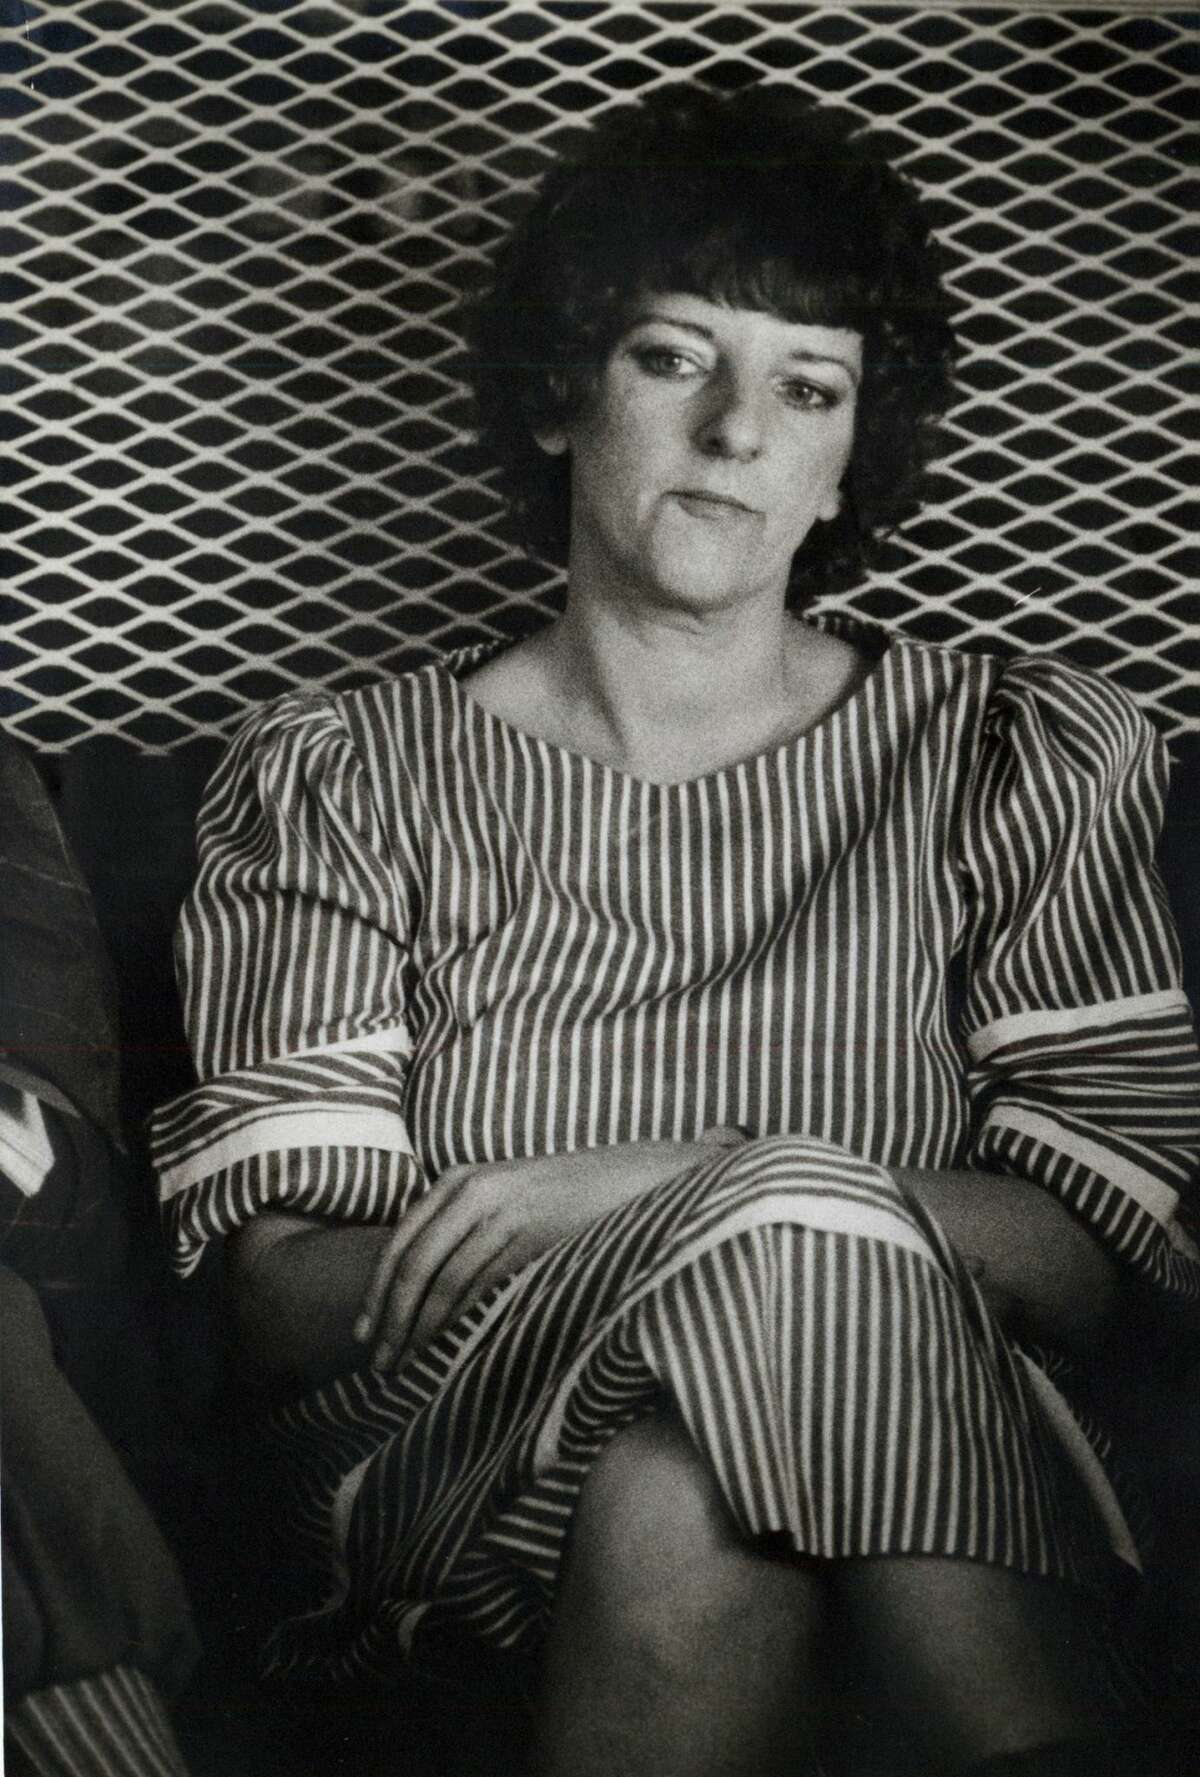 Click through the slideshow to see 'Forensic Files' episodes featuring San Antonio crimes: "Nursery Crimes" - Season 5, Episode 10 Convicted child killer Genene Jones confessed at least three times to giving overdoses to babies in her care, at one point admitting “I didn’t kill the babies, the voices in my head did.” Her crimes were first noticed in Kerrville in 1982 and would later be traced back to San Antonio.